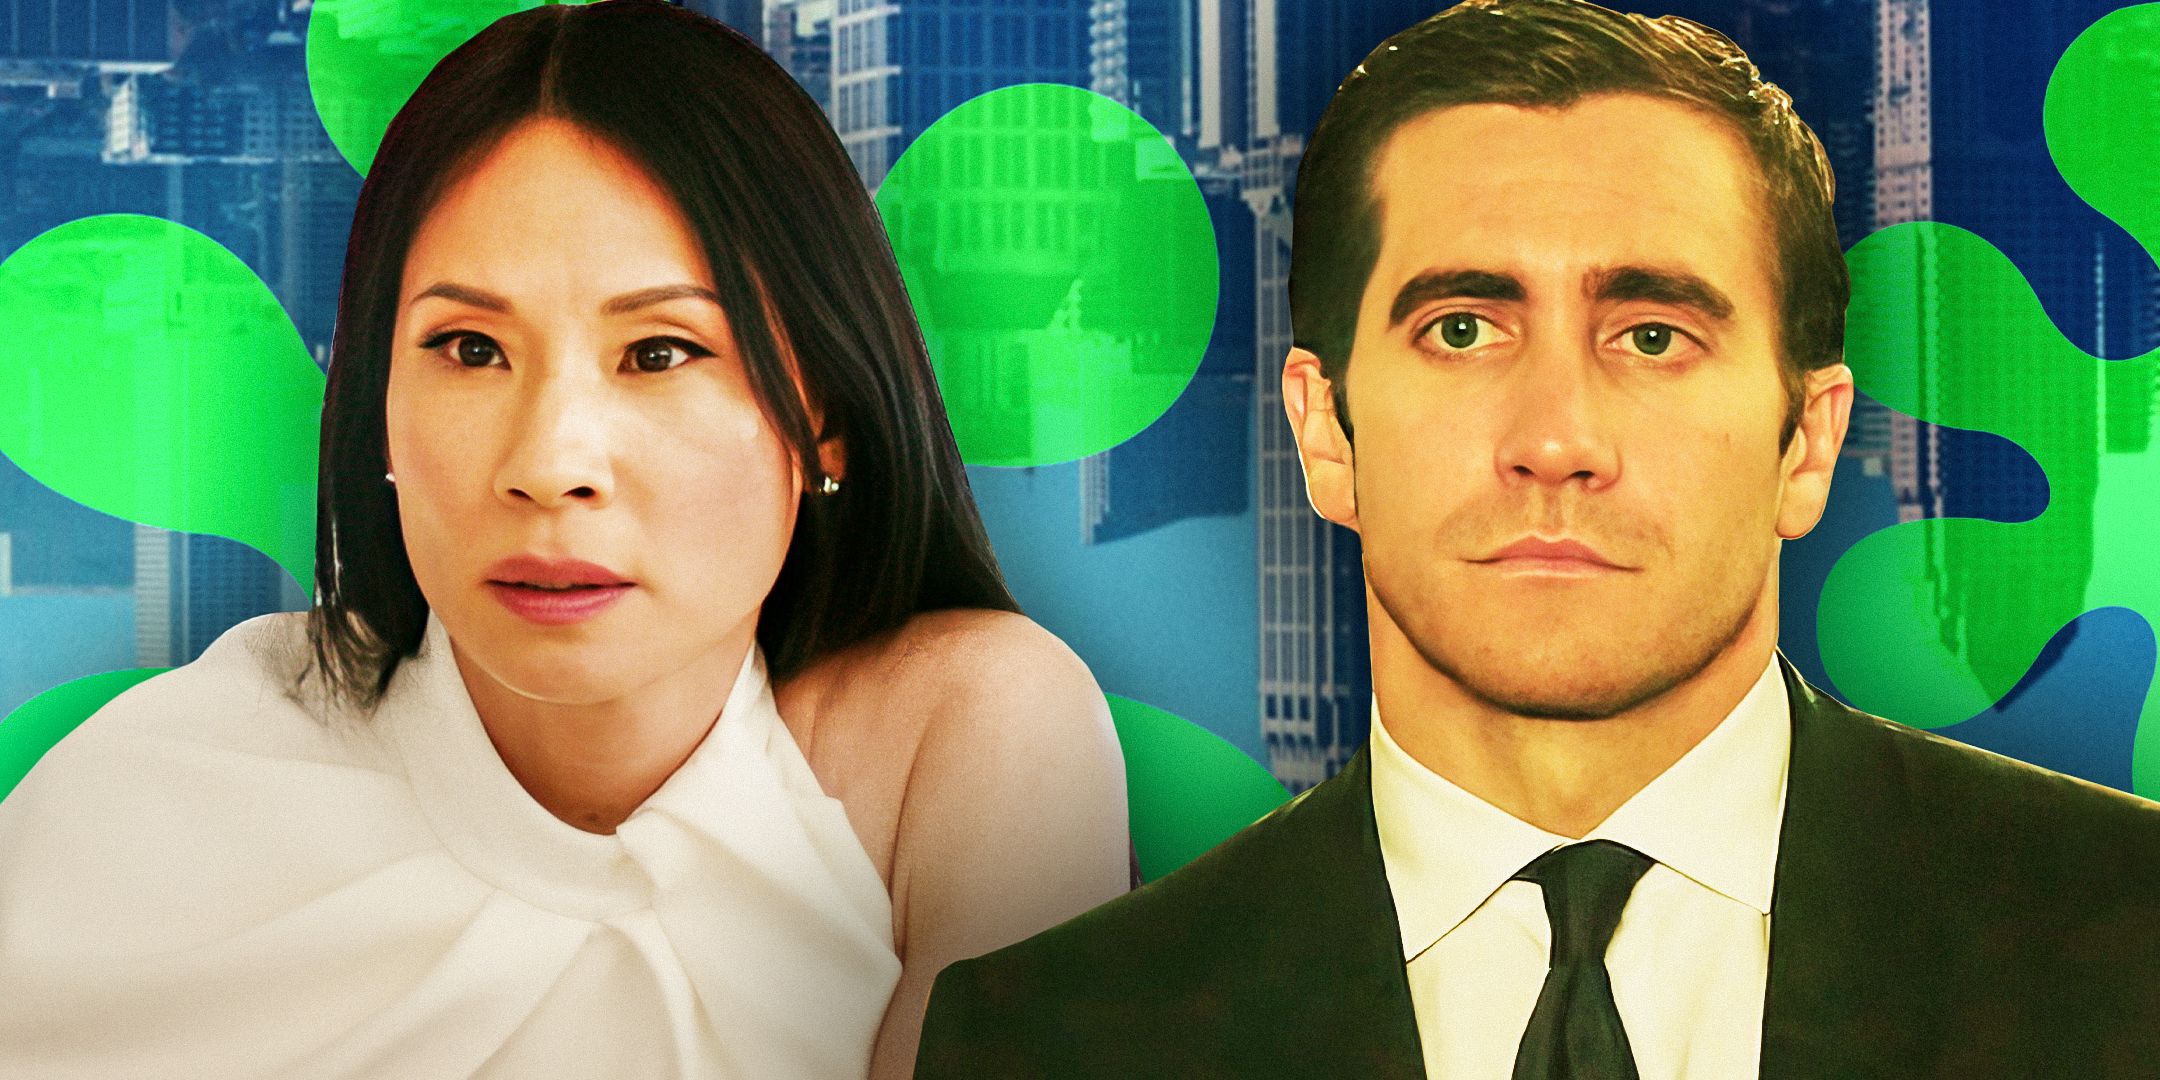 Jake-Gyllenhaal-as-Davis-from-Demolition-and-Lucy-Liu-as-Joyce-Newman-from-A-Man-in-Full